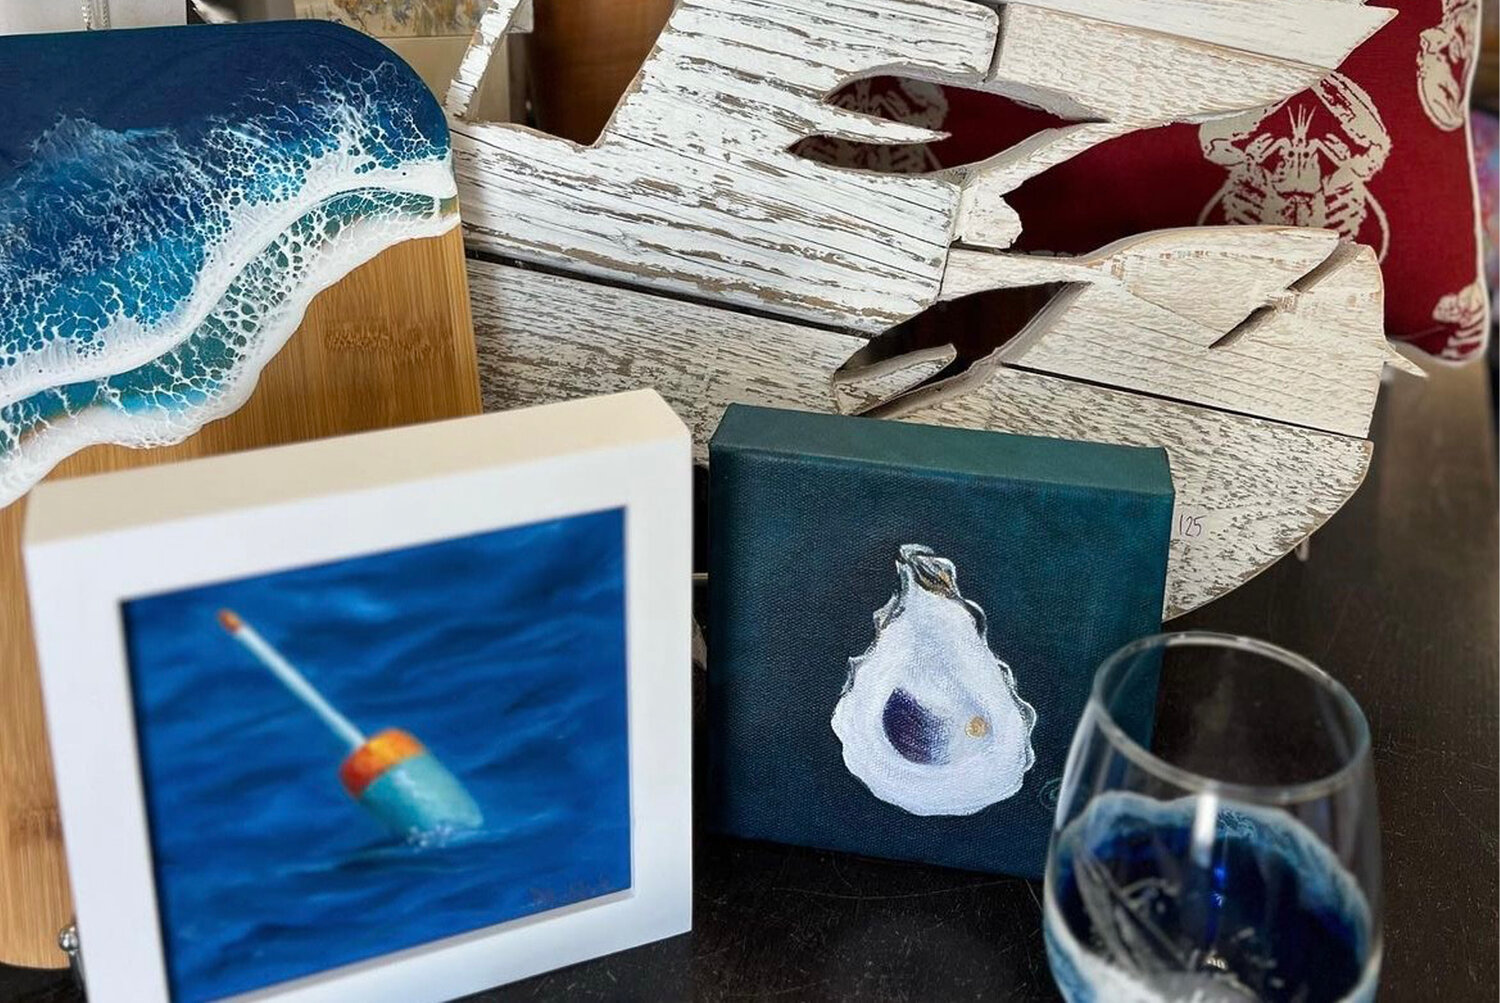 Harbor View Artisans sells wares from across RI